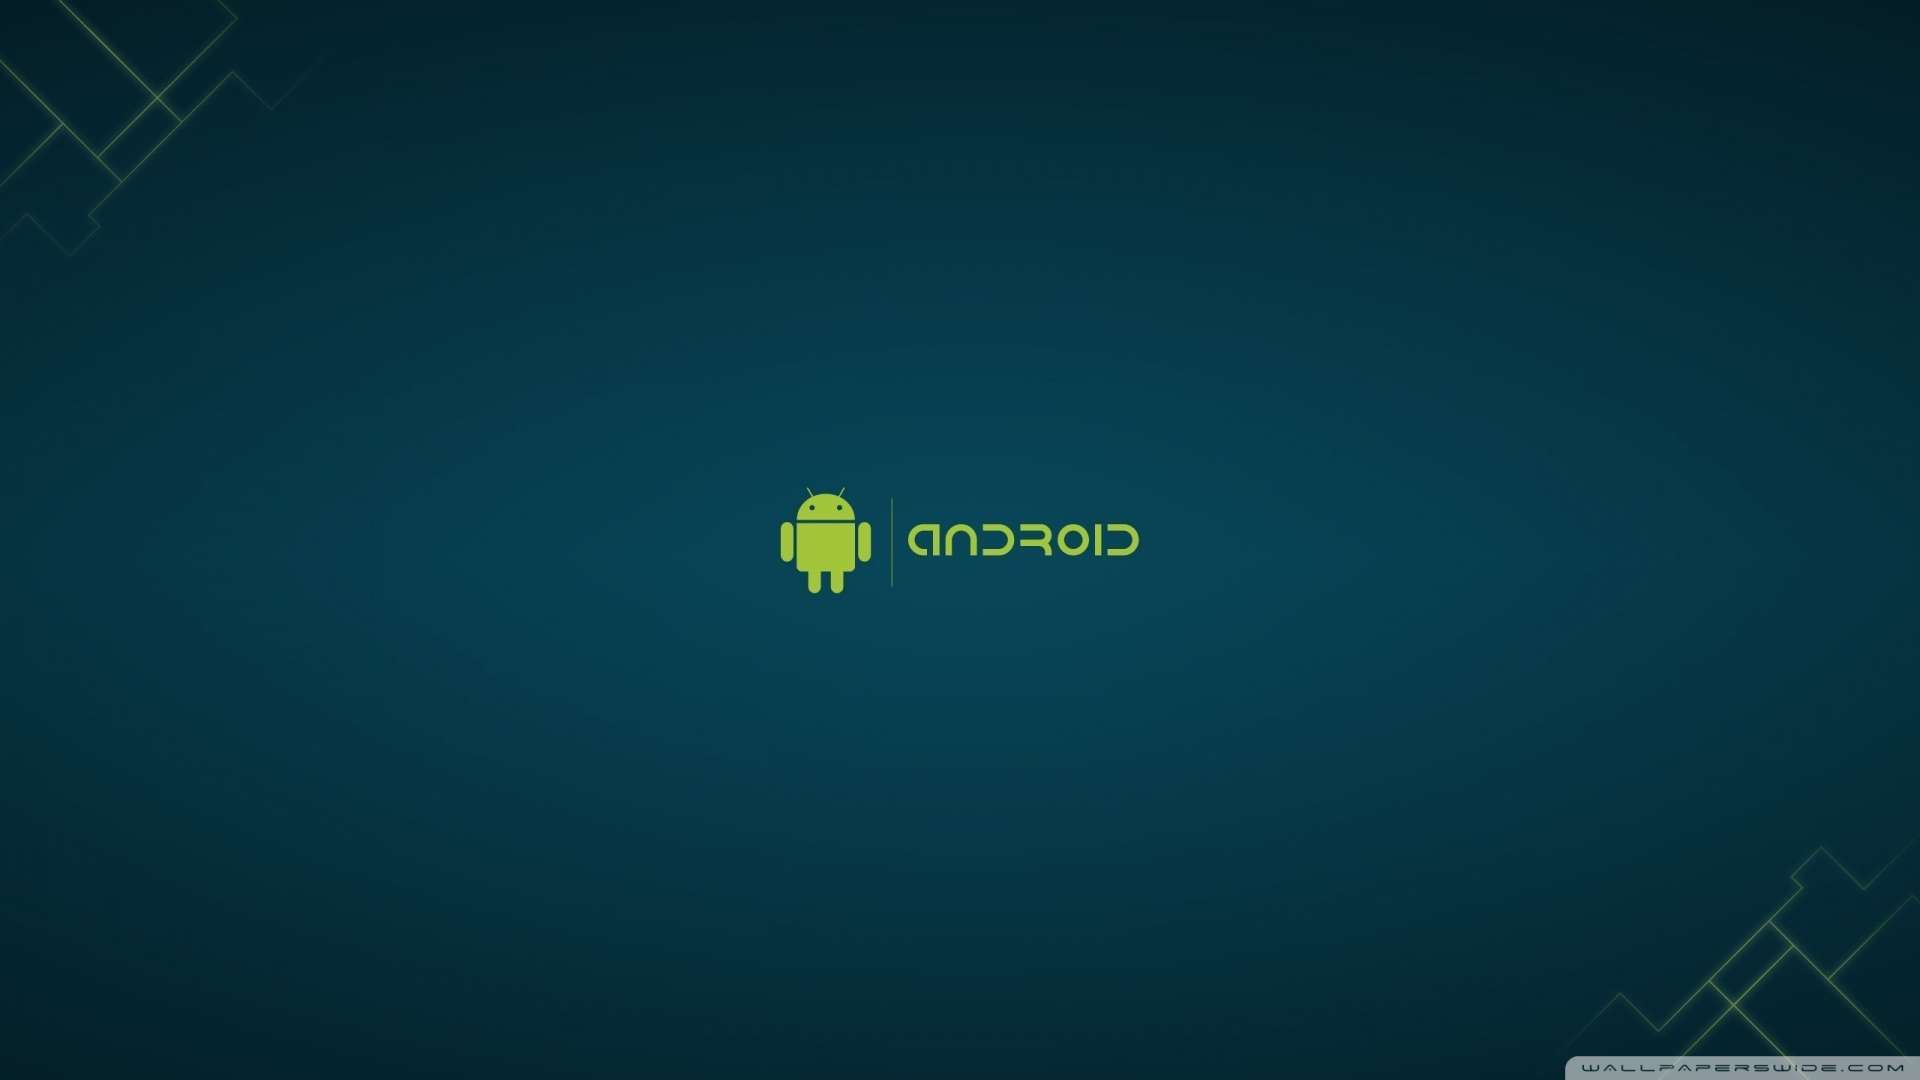 Now Android Background Wallpaper 1080p HD Read Description